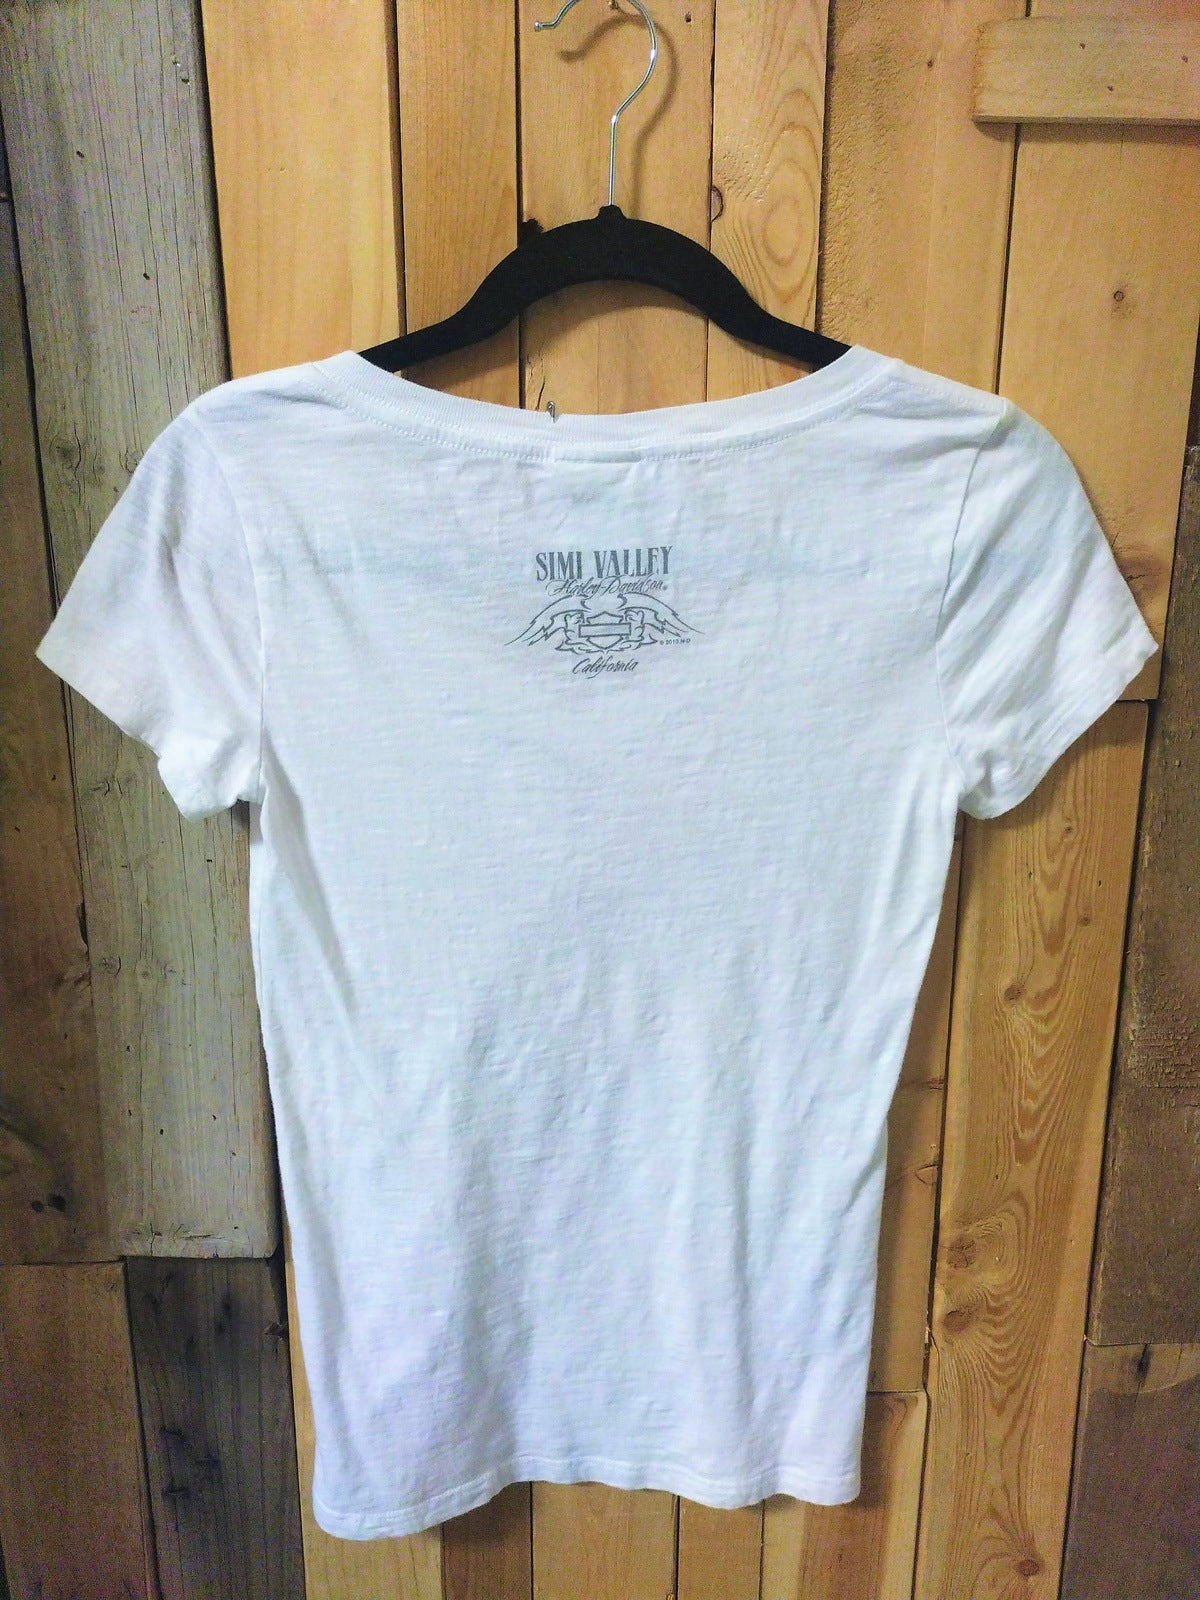 Harley Davidson Simi Valley Ca. Women's T Shirt Size Small